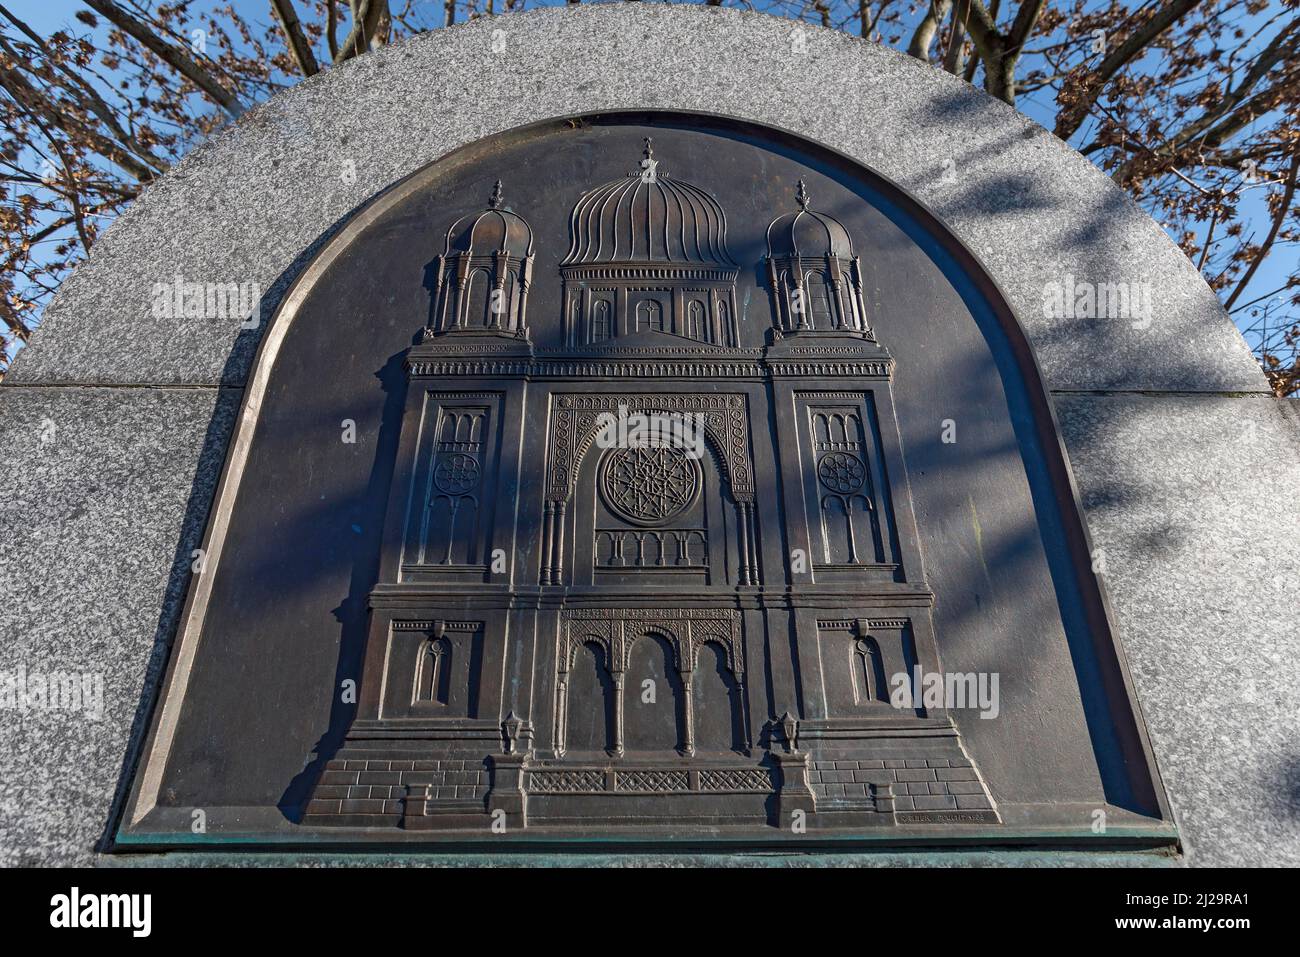 Relief at the memorial site of the former synagogue burnt down by the Nazi regime in 1938, Nuremberg, Middle Franconia, Bavaria, Germany Stock Photo